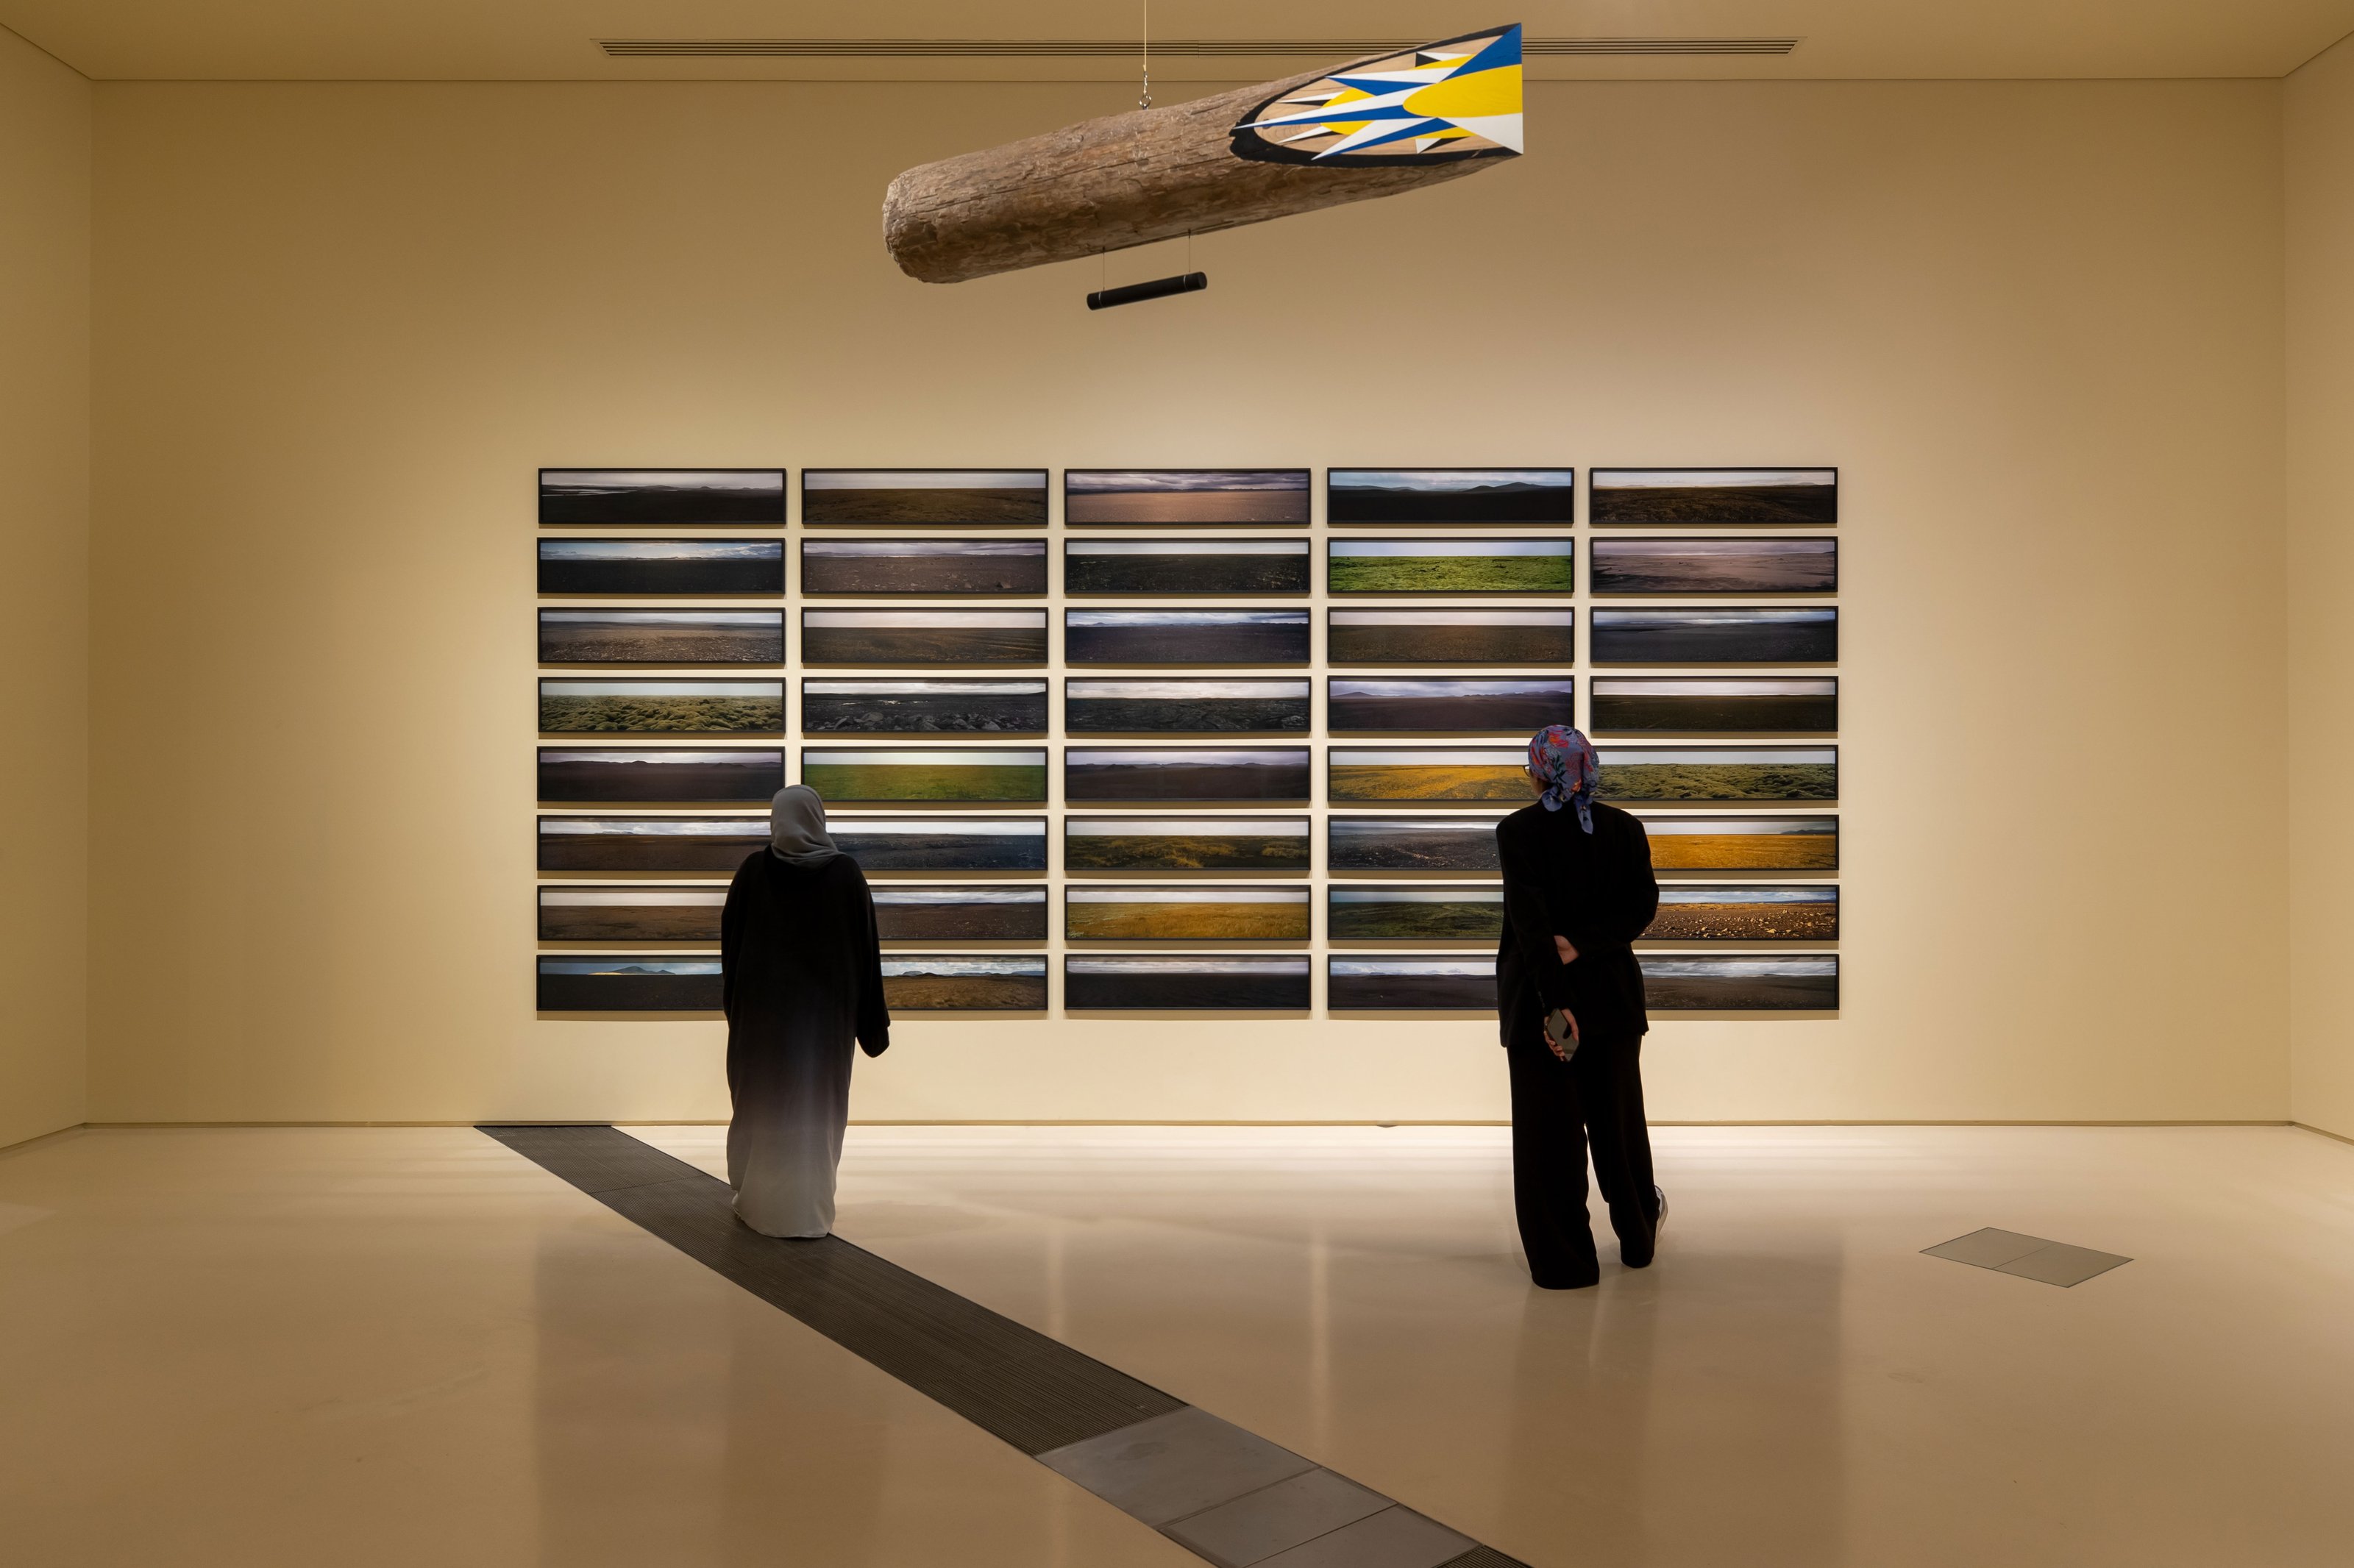 2 people looking at 40 rectangular paintings arranged neatly on the off-white wall of a high-ceilinged art gallery.